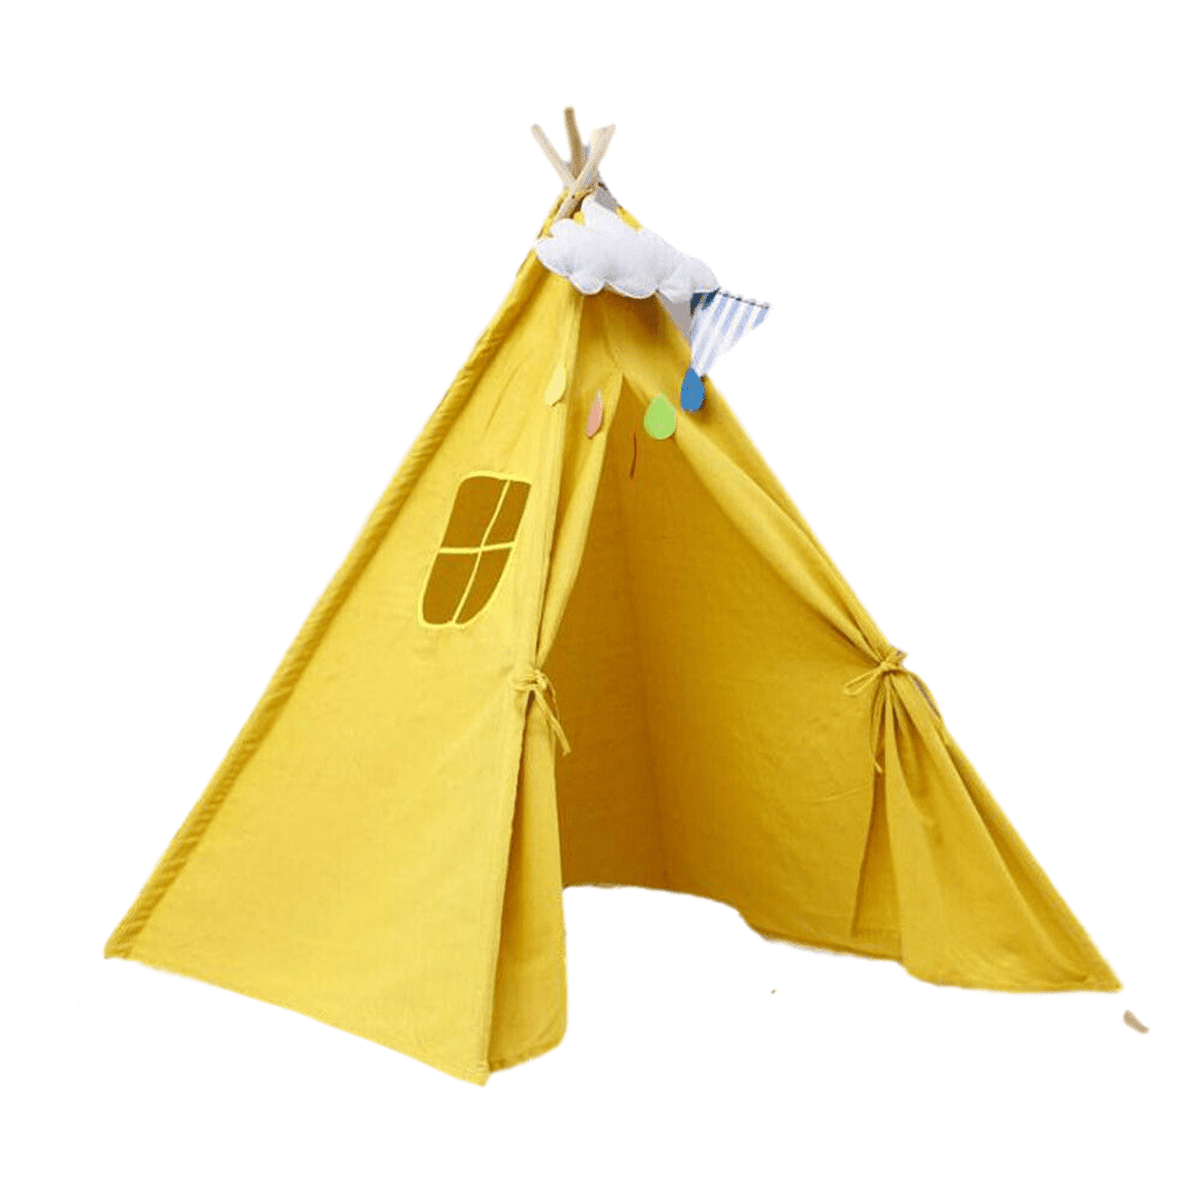 Large Canvas Kids Teepee Indian Tent Childrens Wigwam Indoor Outdoor Play House 